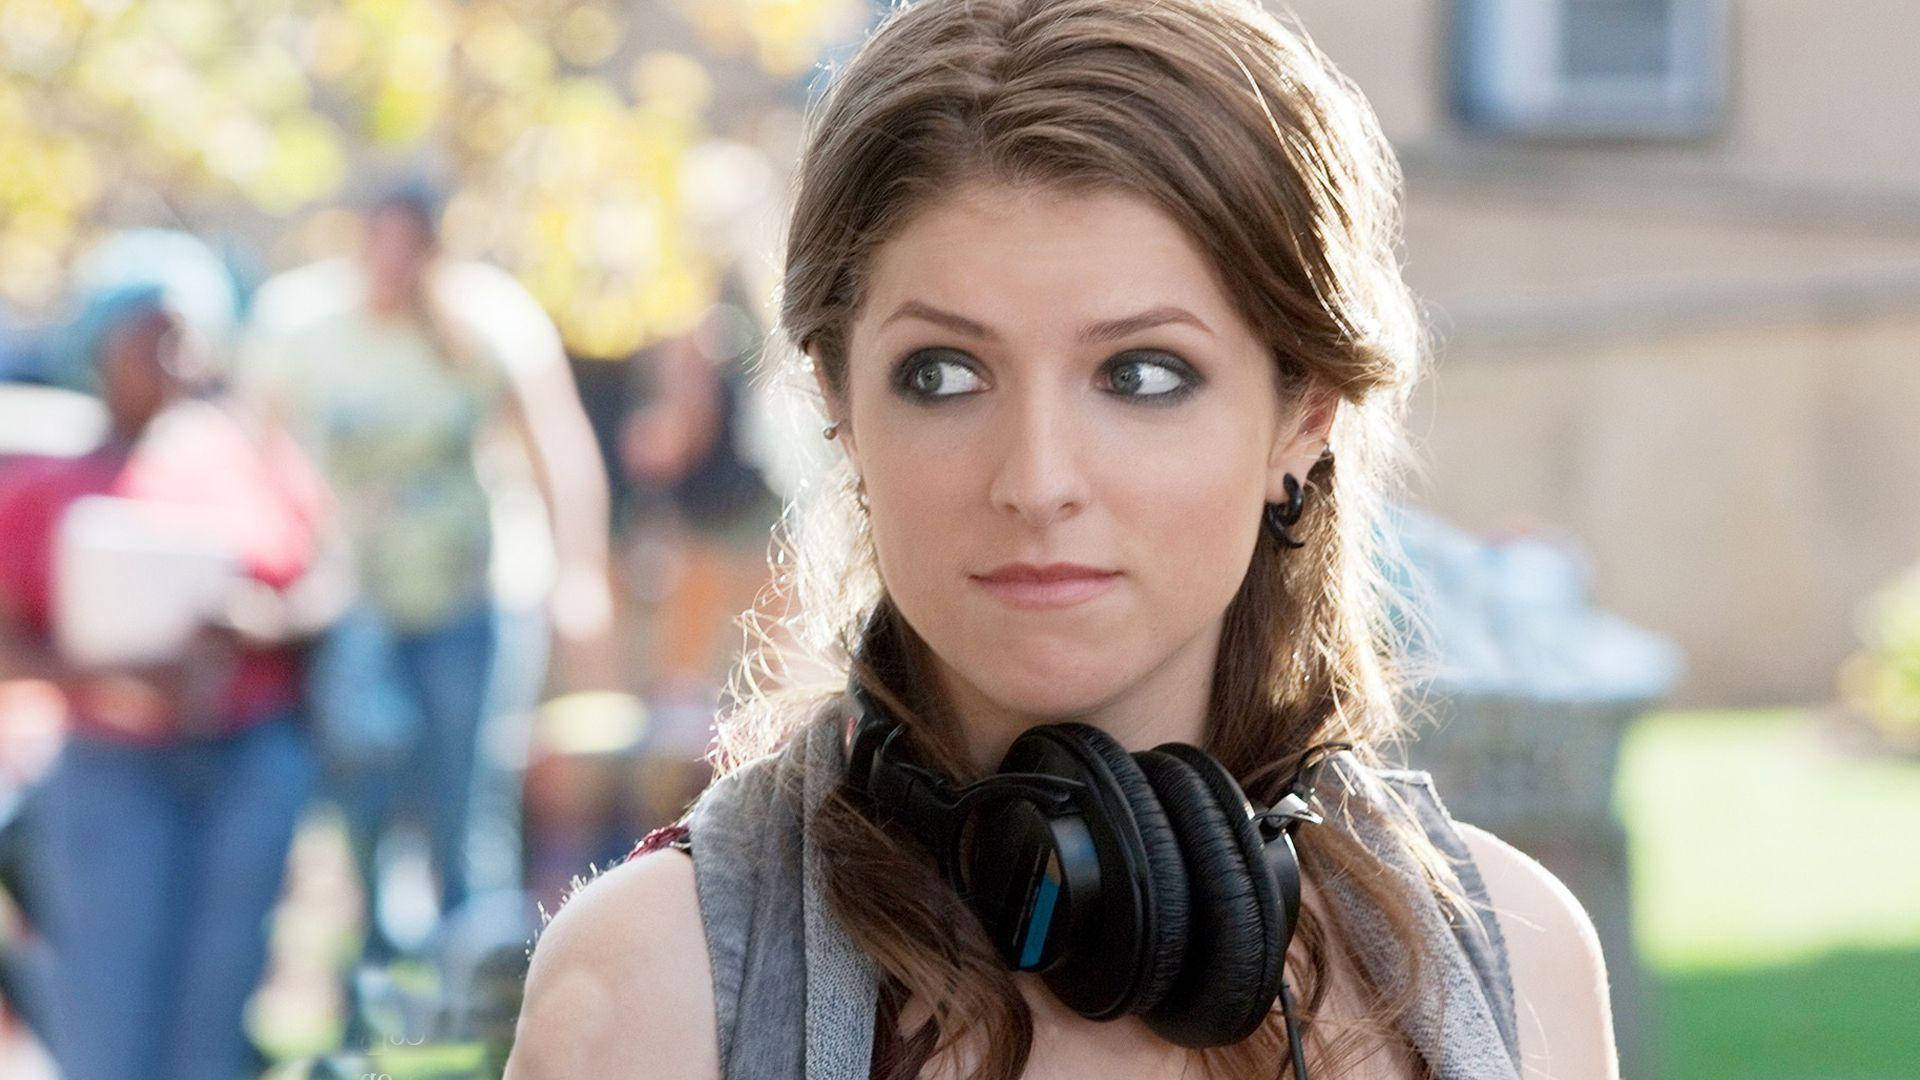 Anna Kendrick as Beca in Pitch Perfect Wallpaper